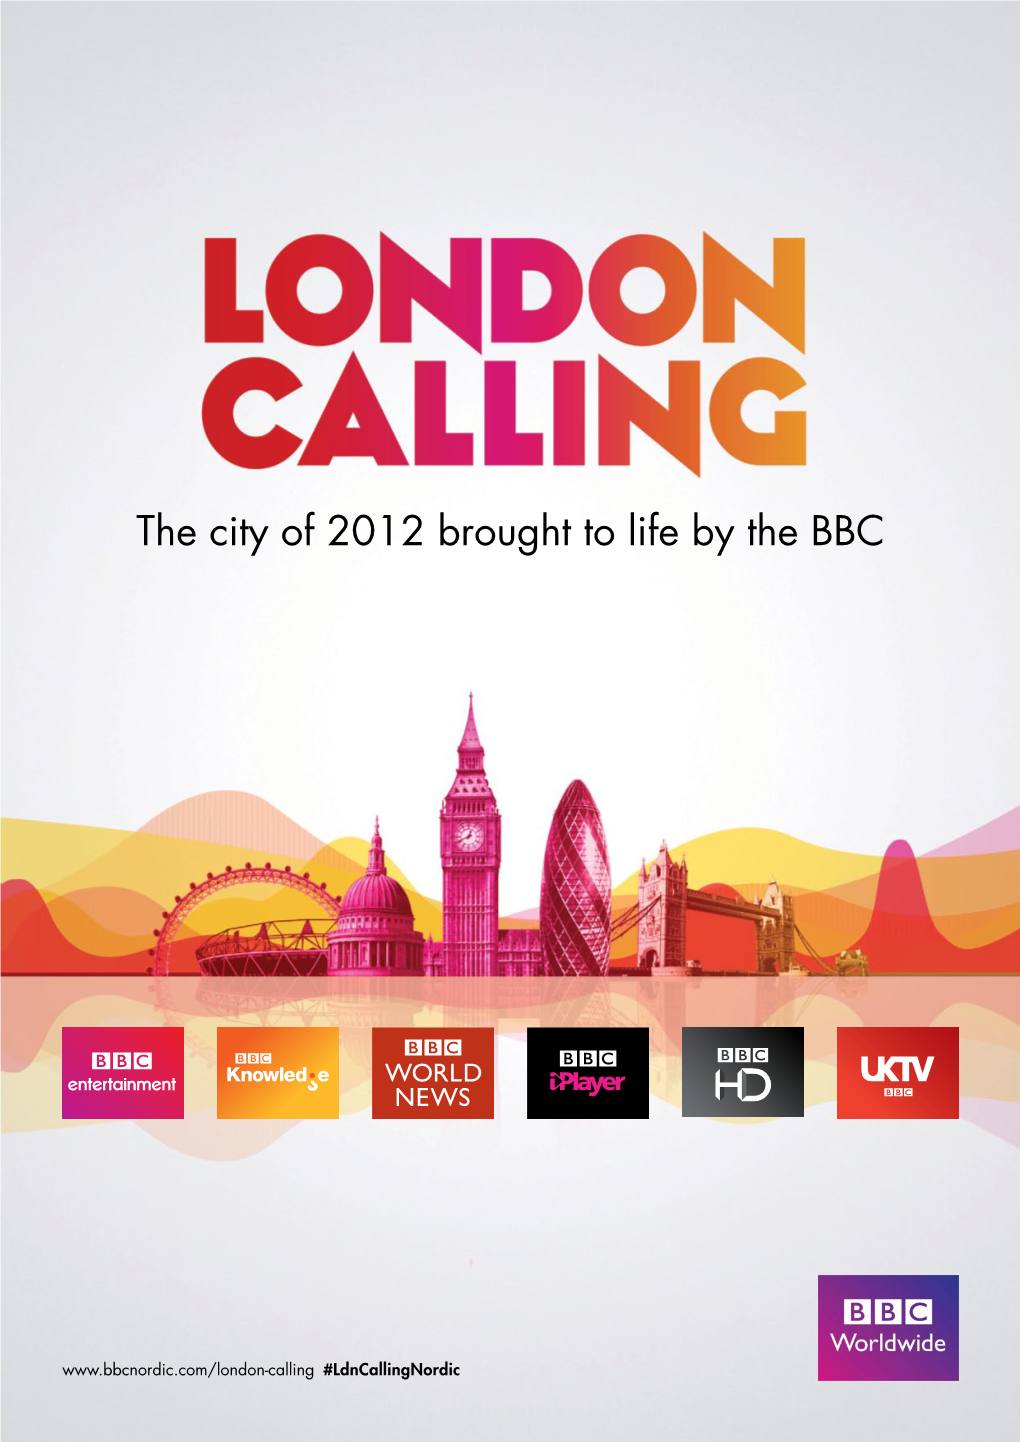 The City of 2012 Brought to Life by the BBC